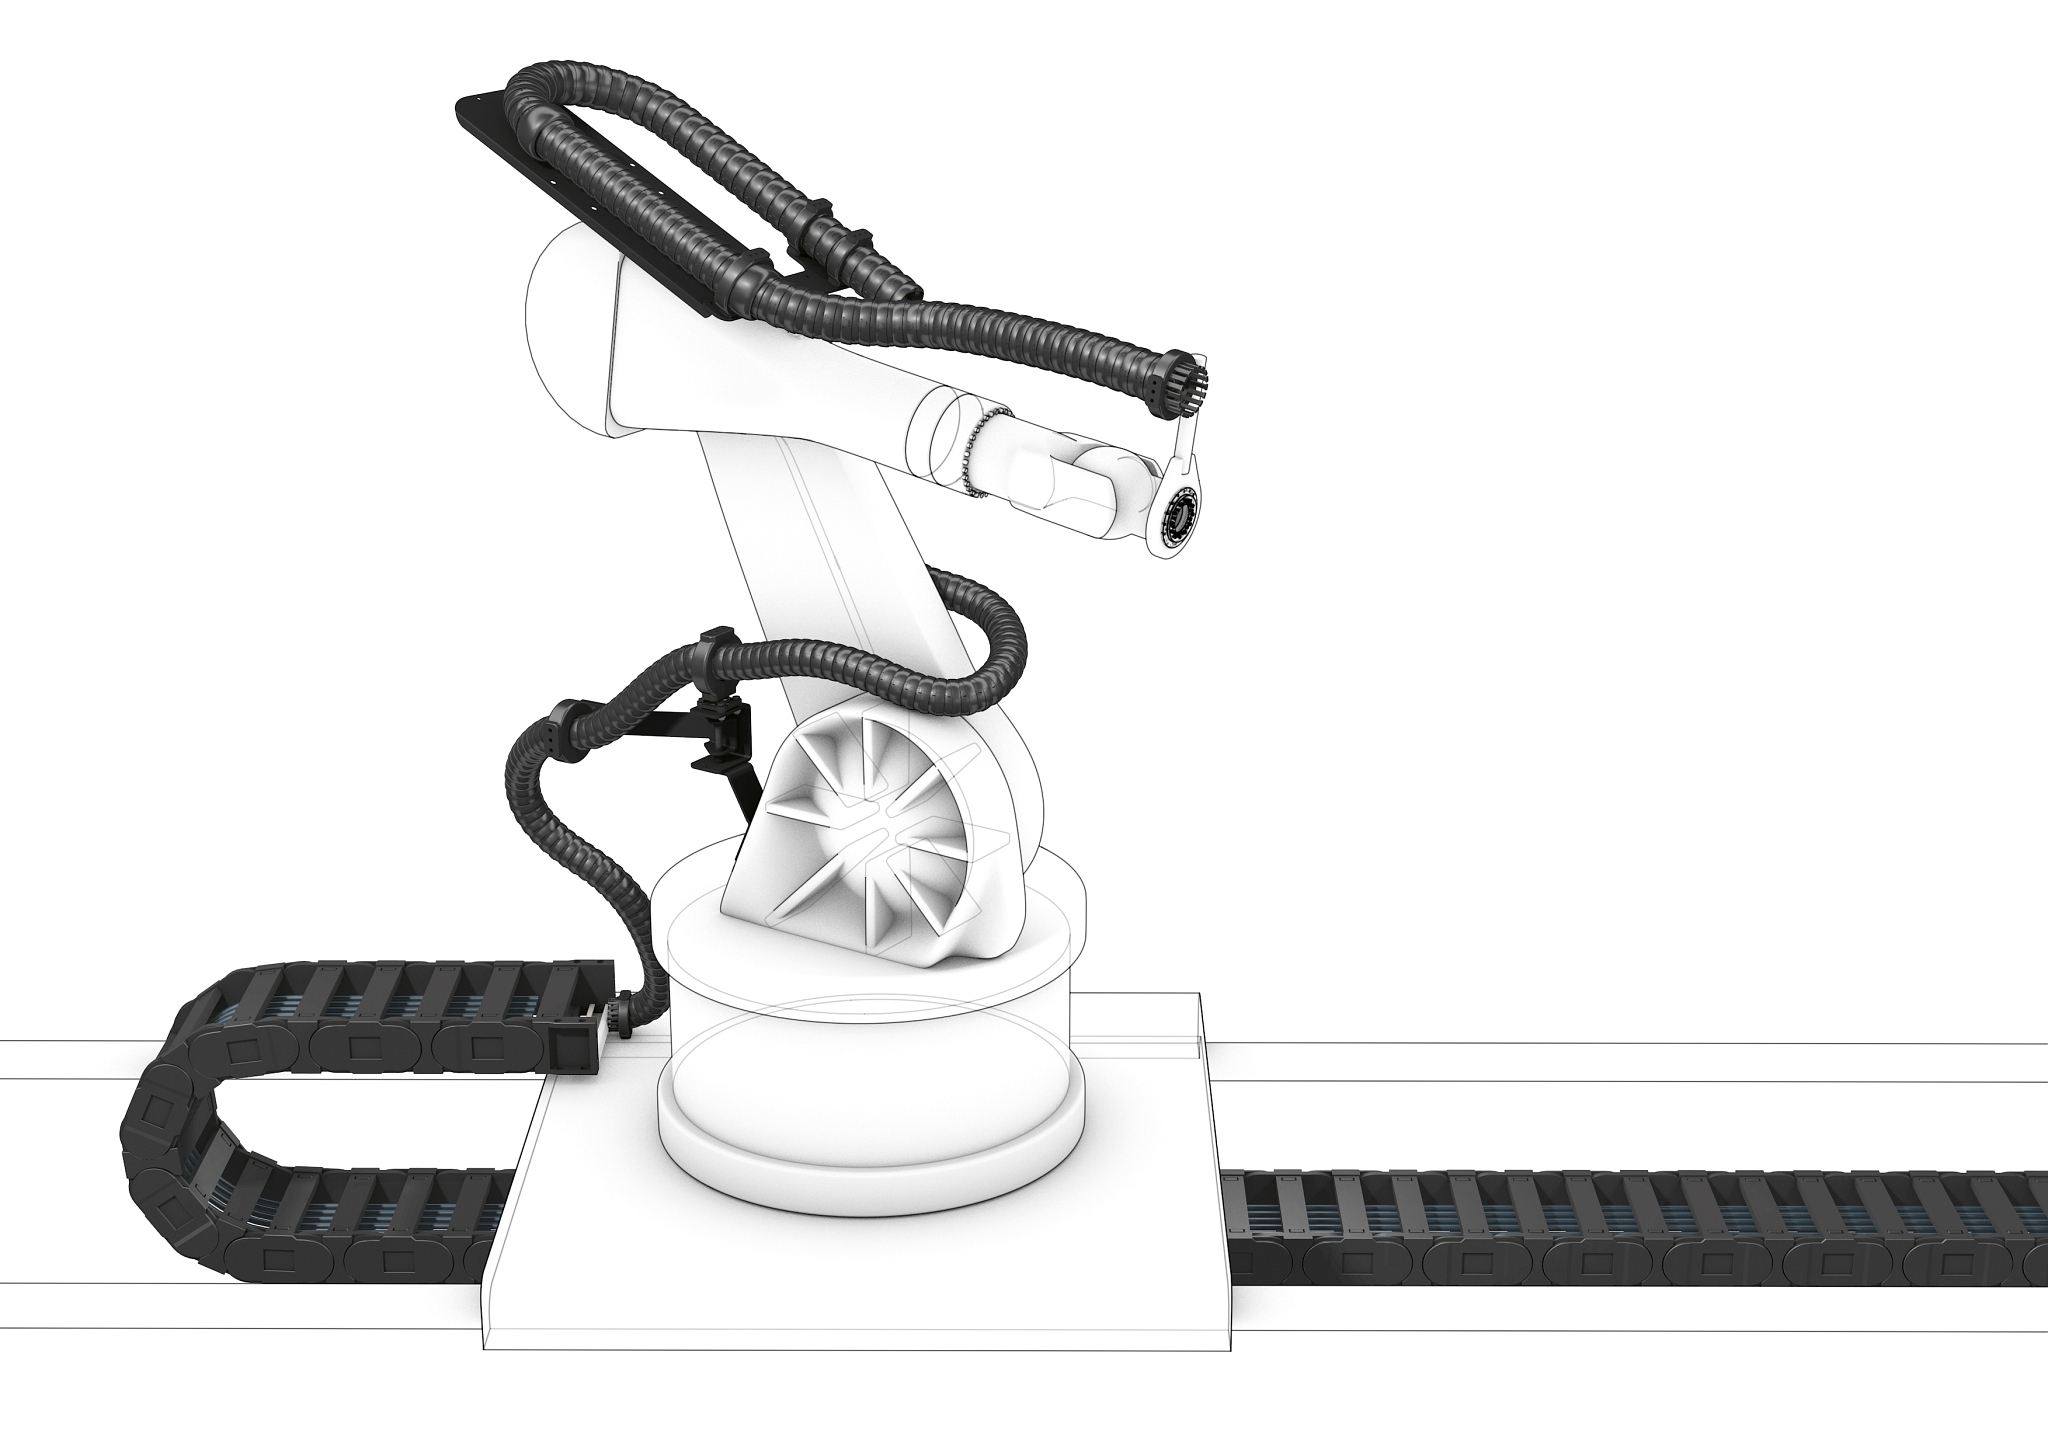 Robot 3 in 1 with RS, swivel arm and linear e-chain for axis 7